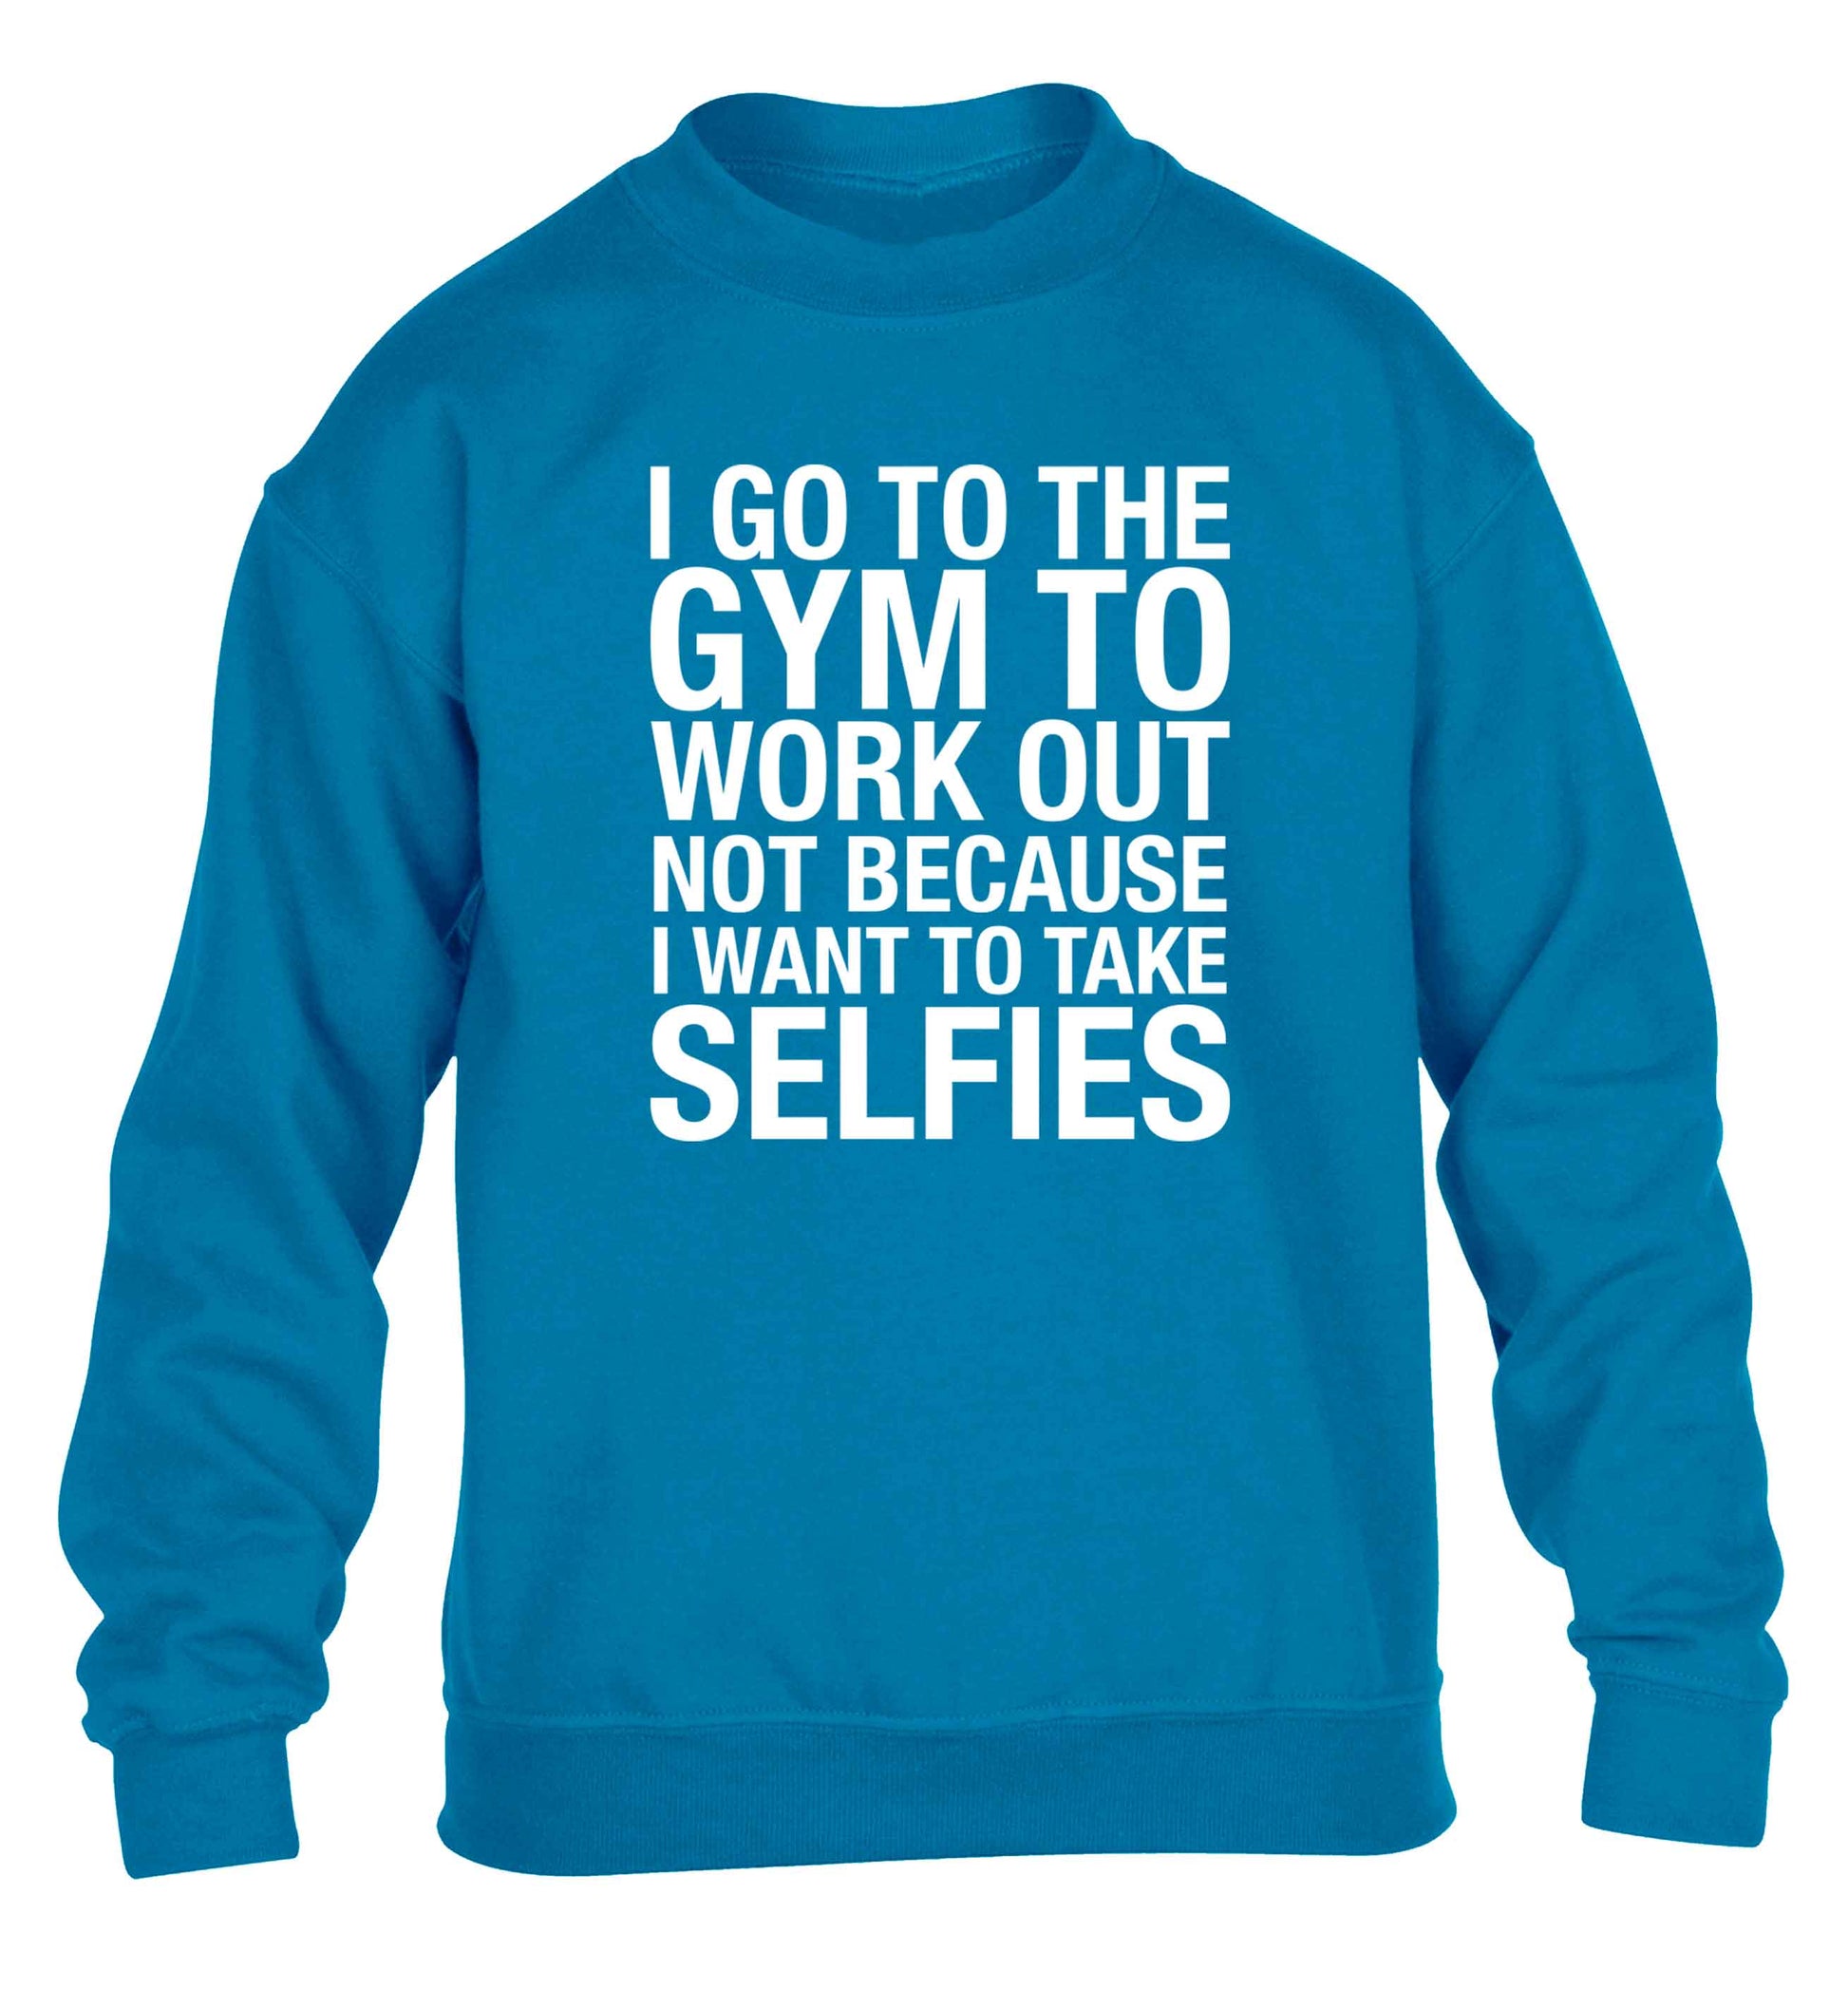 I go to the gym to workout not to take selfies children's blue sweater 12-13 Years